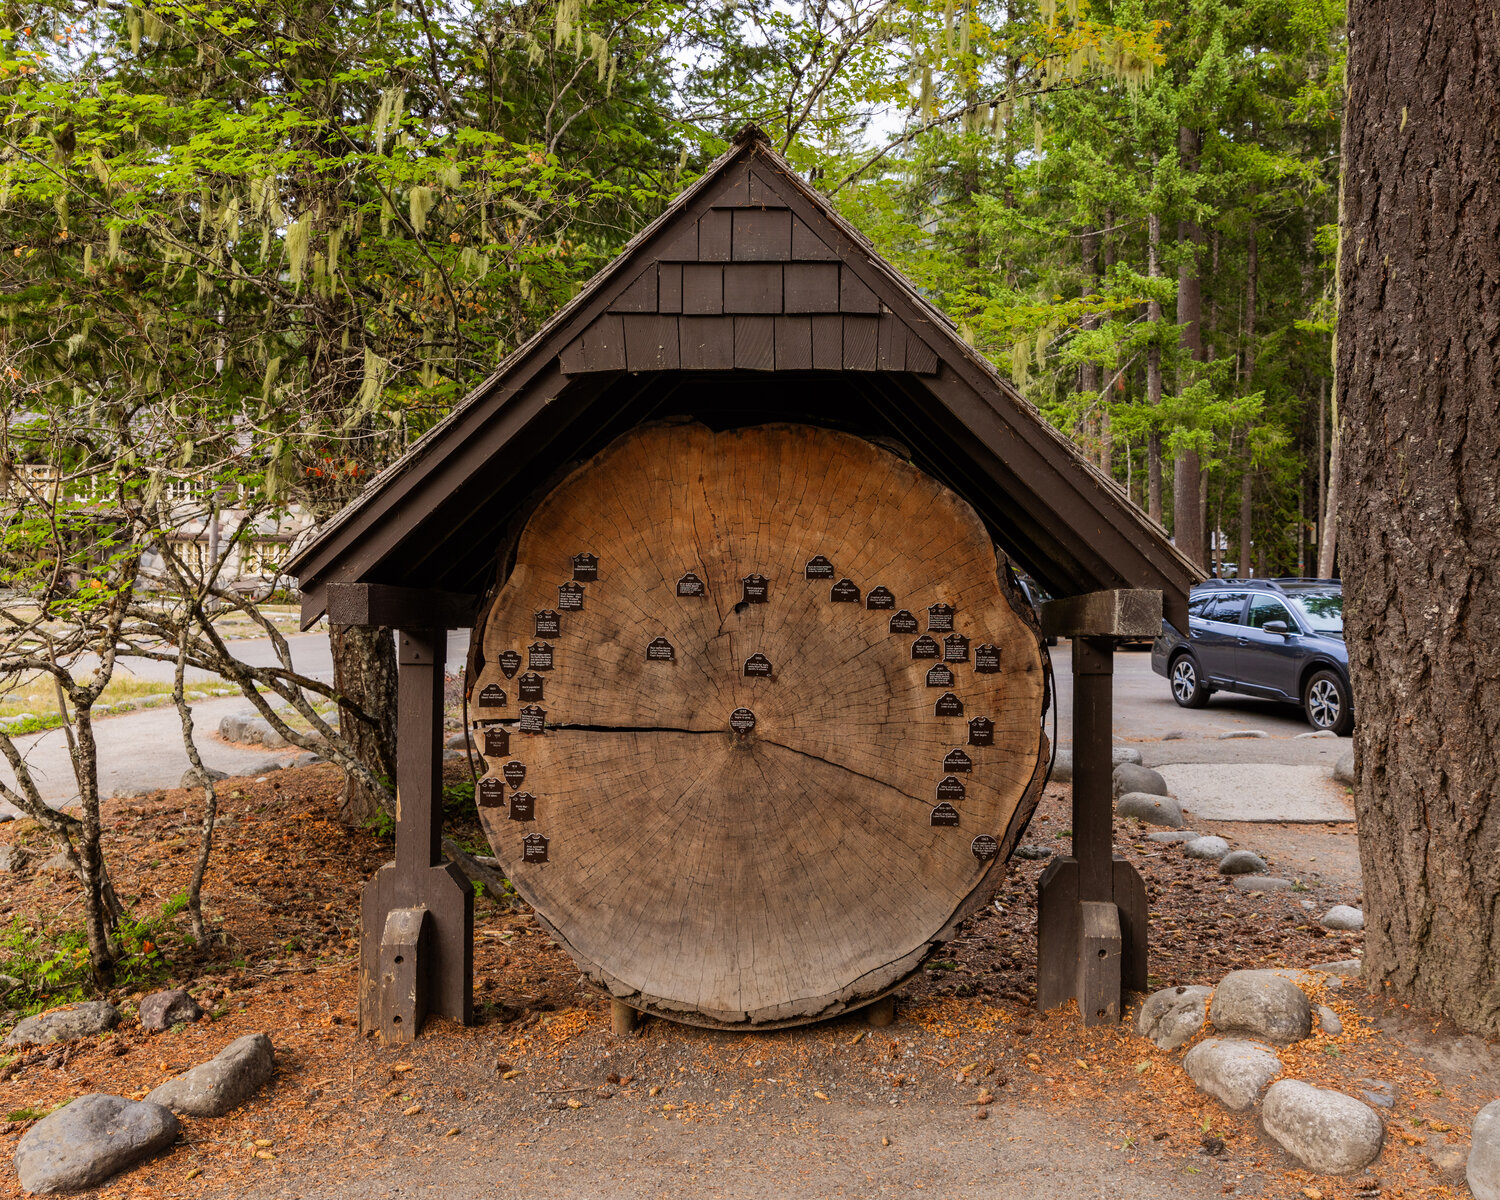 Tree rings of a Douglas fir are displayed at Longmire inside Mount Rainier National Park on Tuesday, Sept. 12.